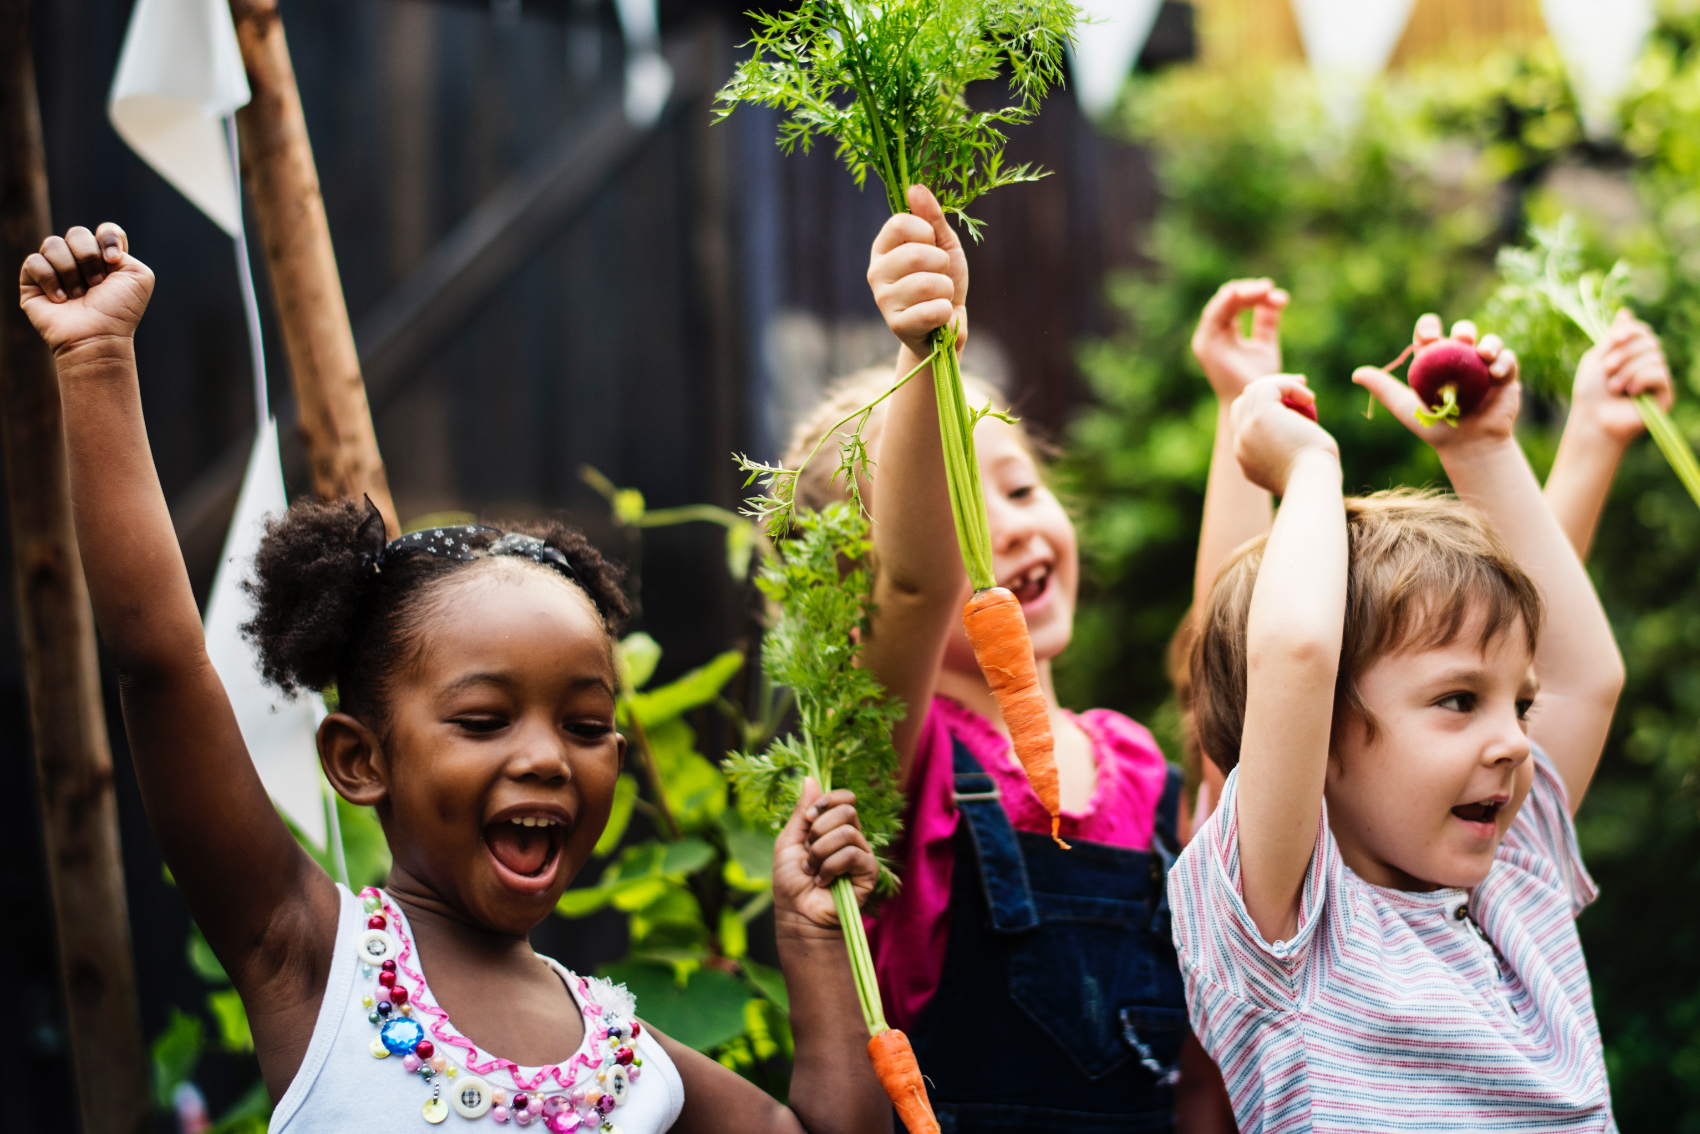 small children standing in a garden holding up just picked vegetables